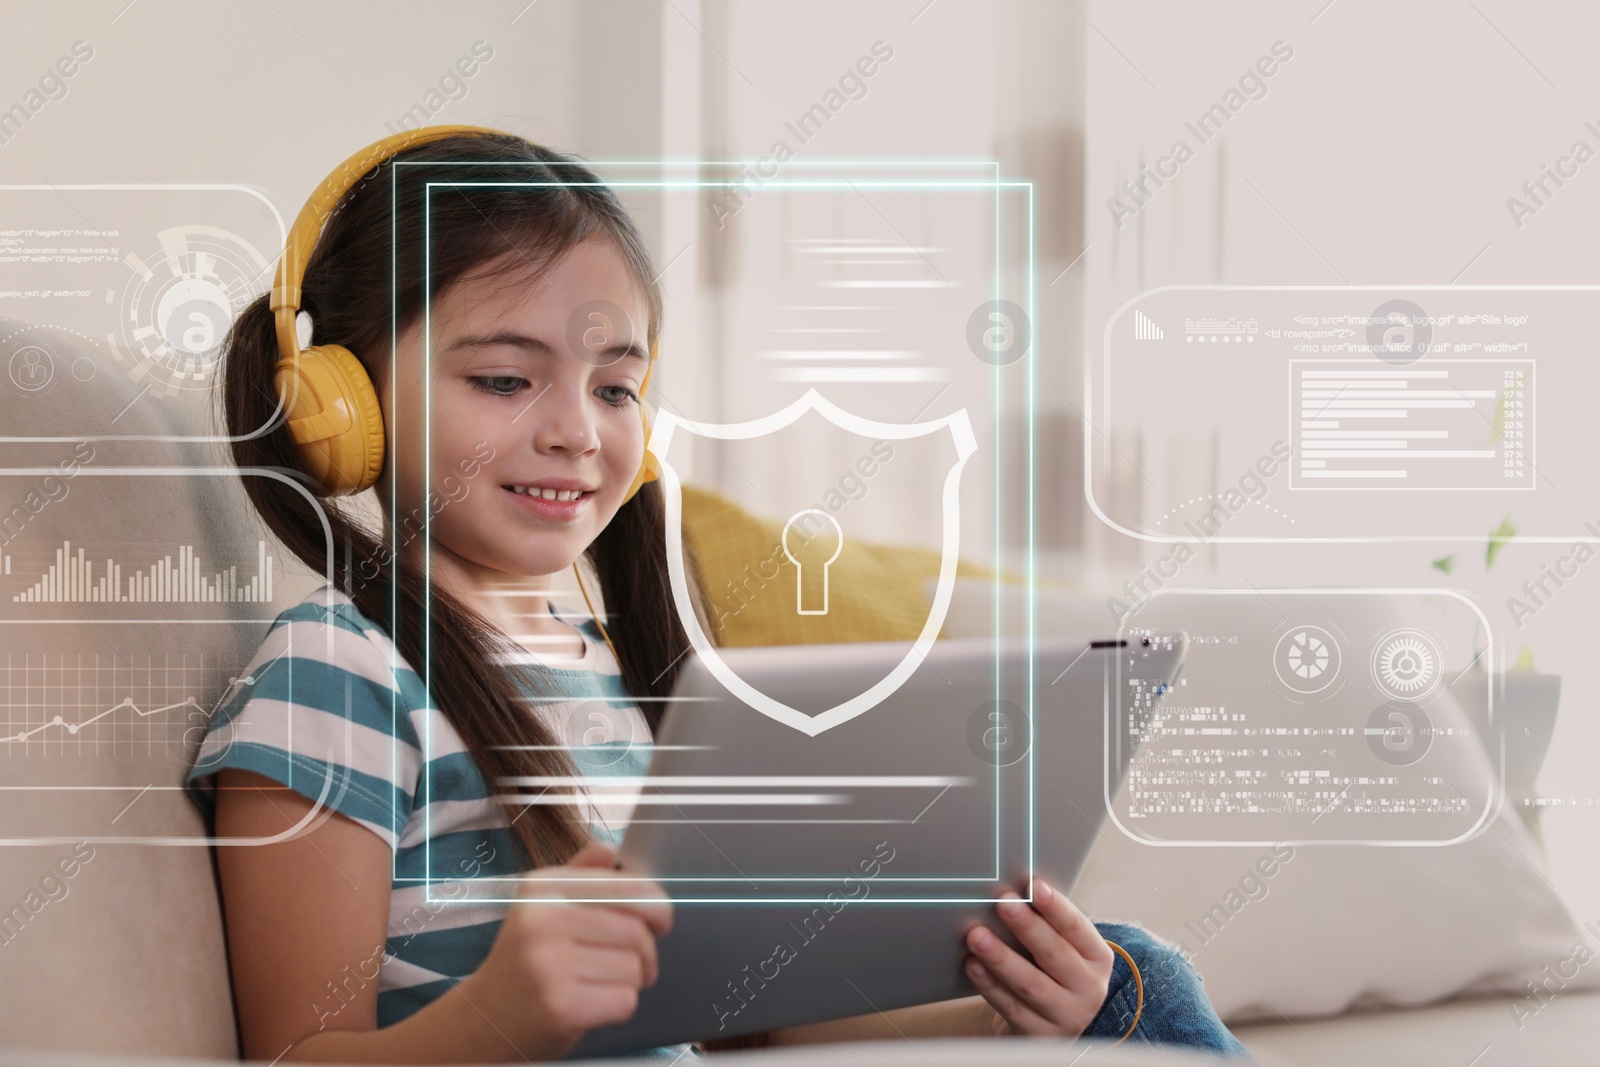 Image of Child safety online. Little girl using tablet at home. Illustration of internet blocking app on foreground